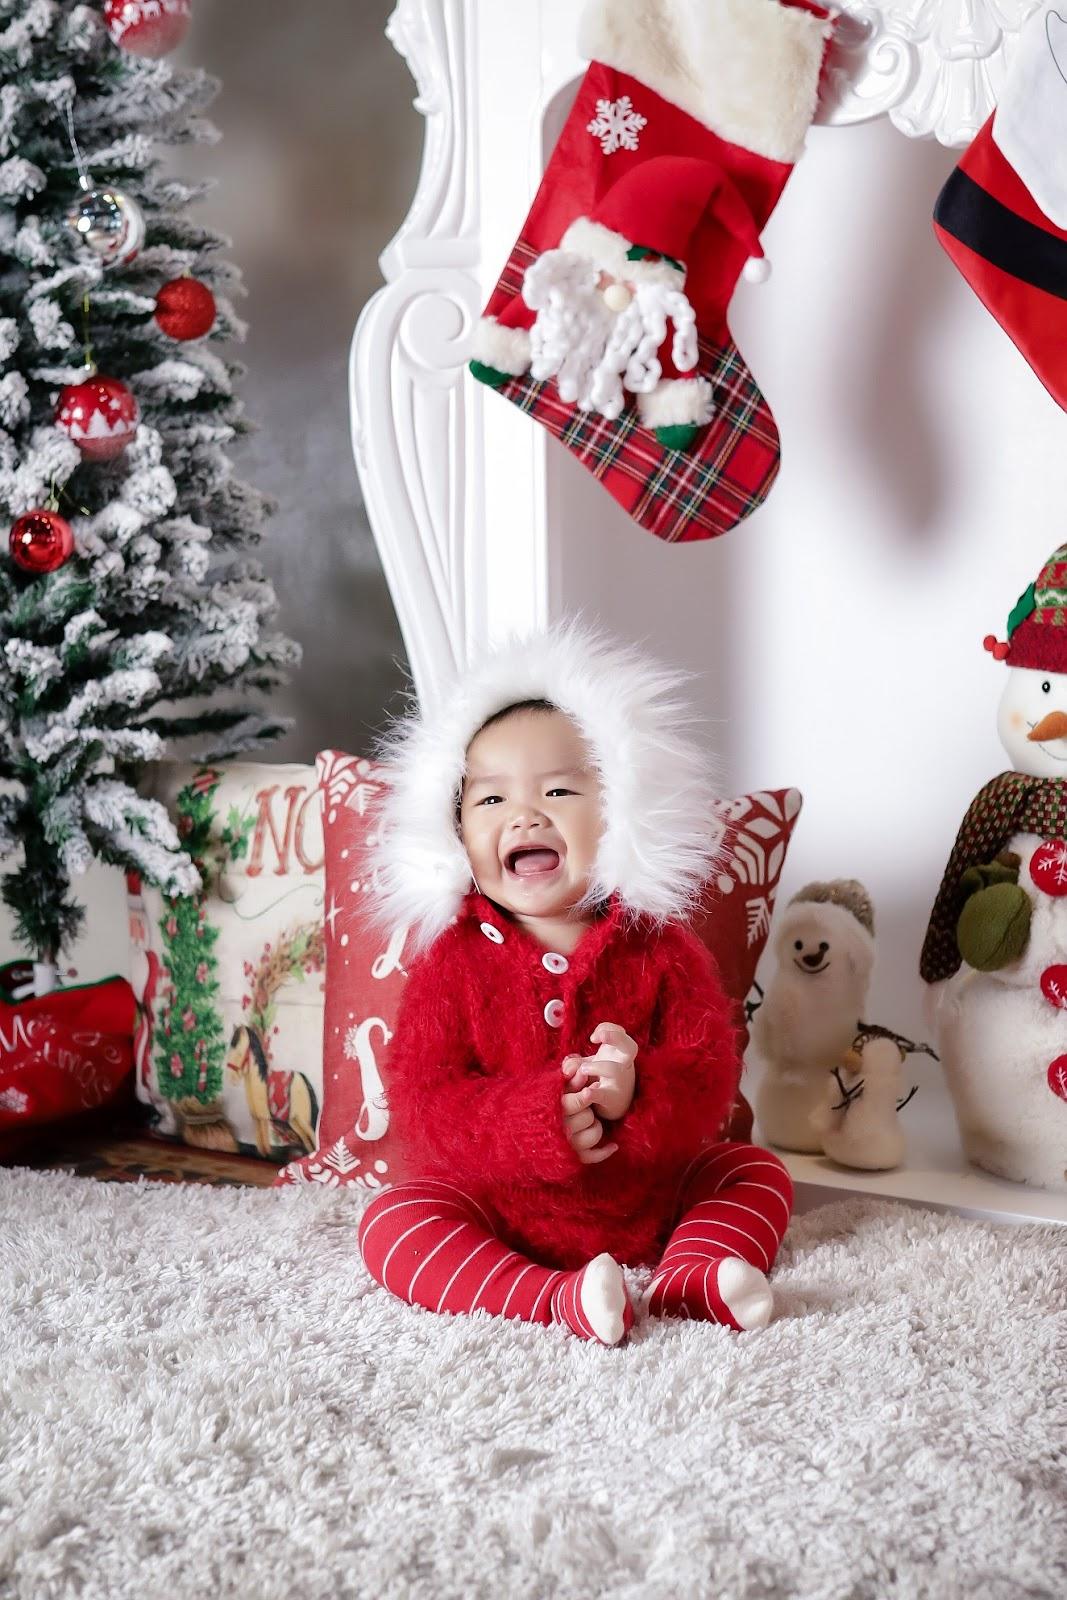 newborn christmas photo idea: baby wearing an Eskimo outfit posing in a winter-inspired setup